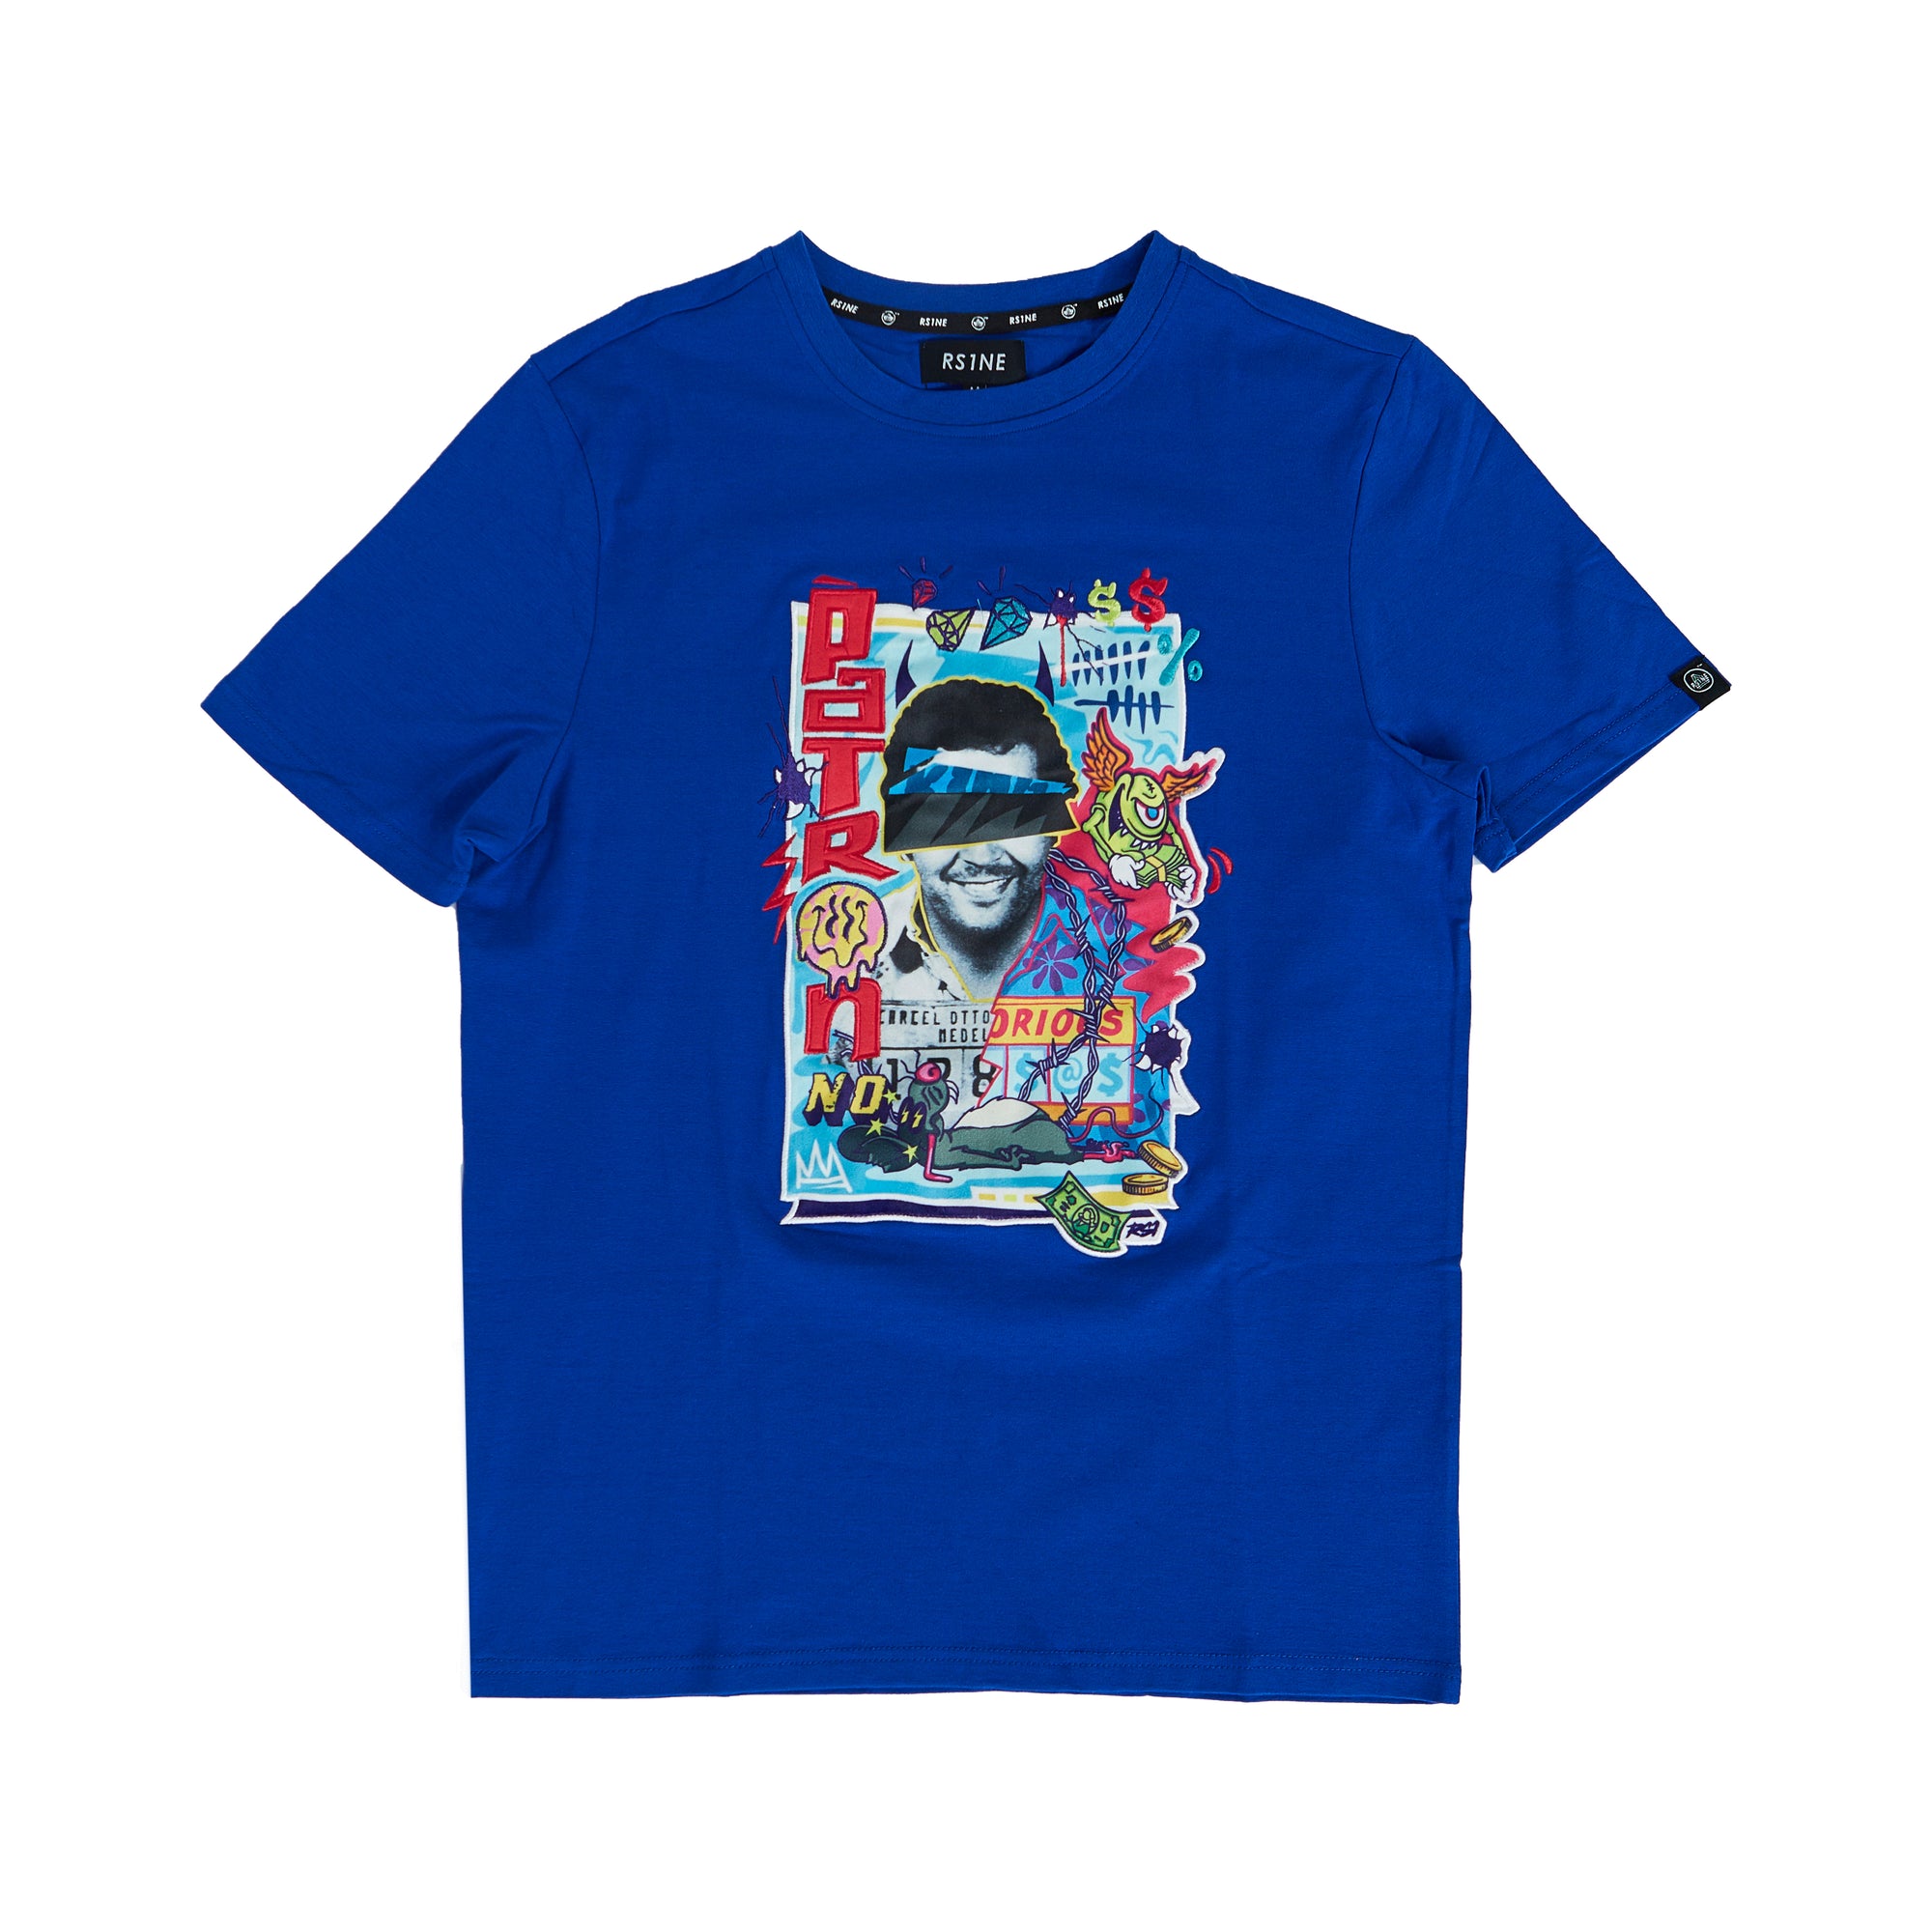 Patron No Rats Embroidery Patch Tee (Royal Blue)